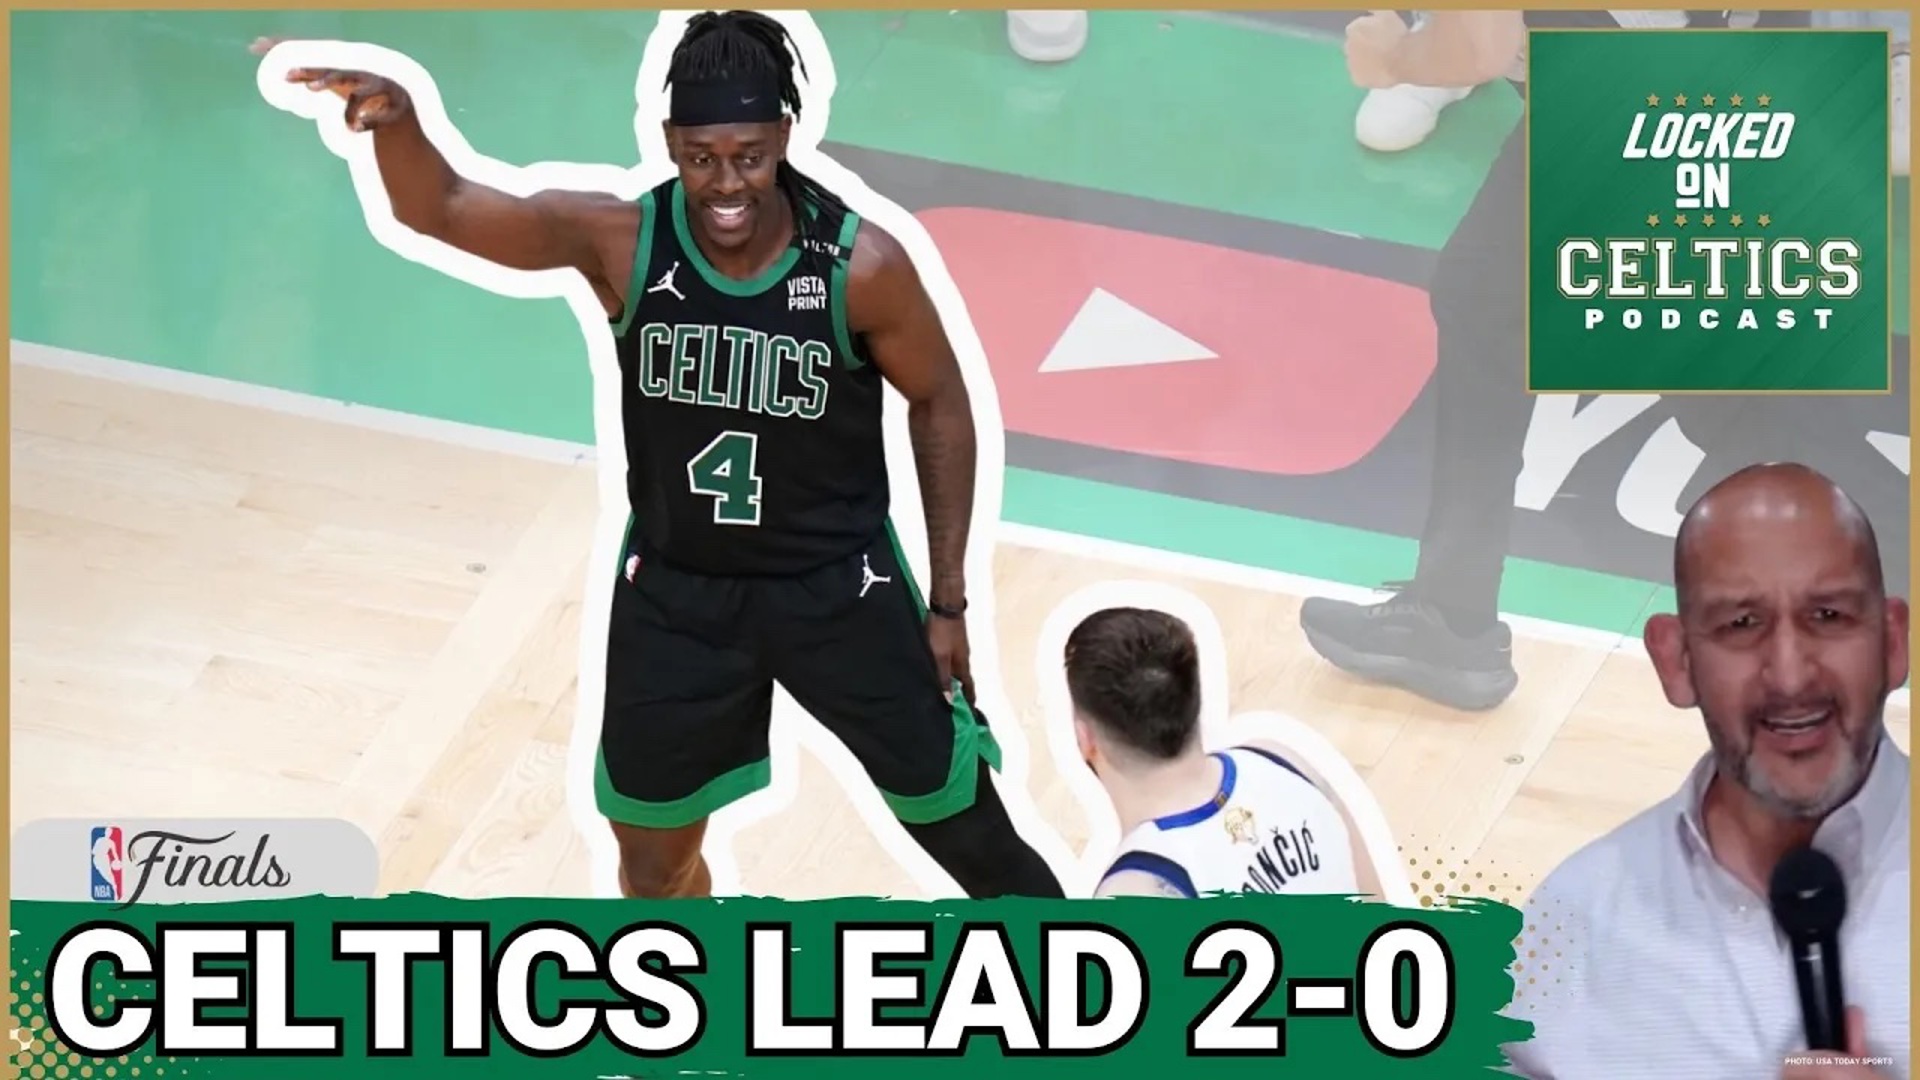 The Celtics followed the same game plan and got a similar result in Game 2 of the NBA Finals.